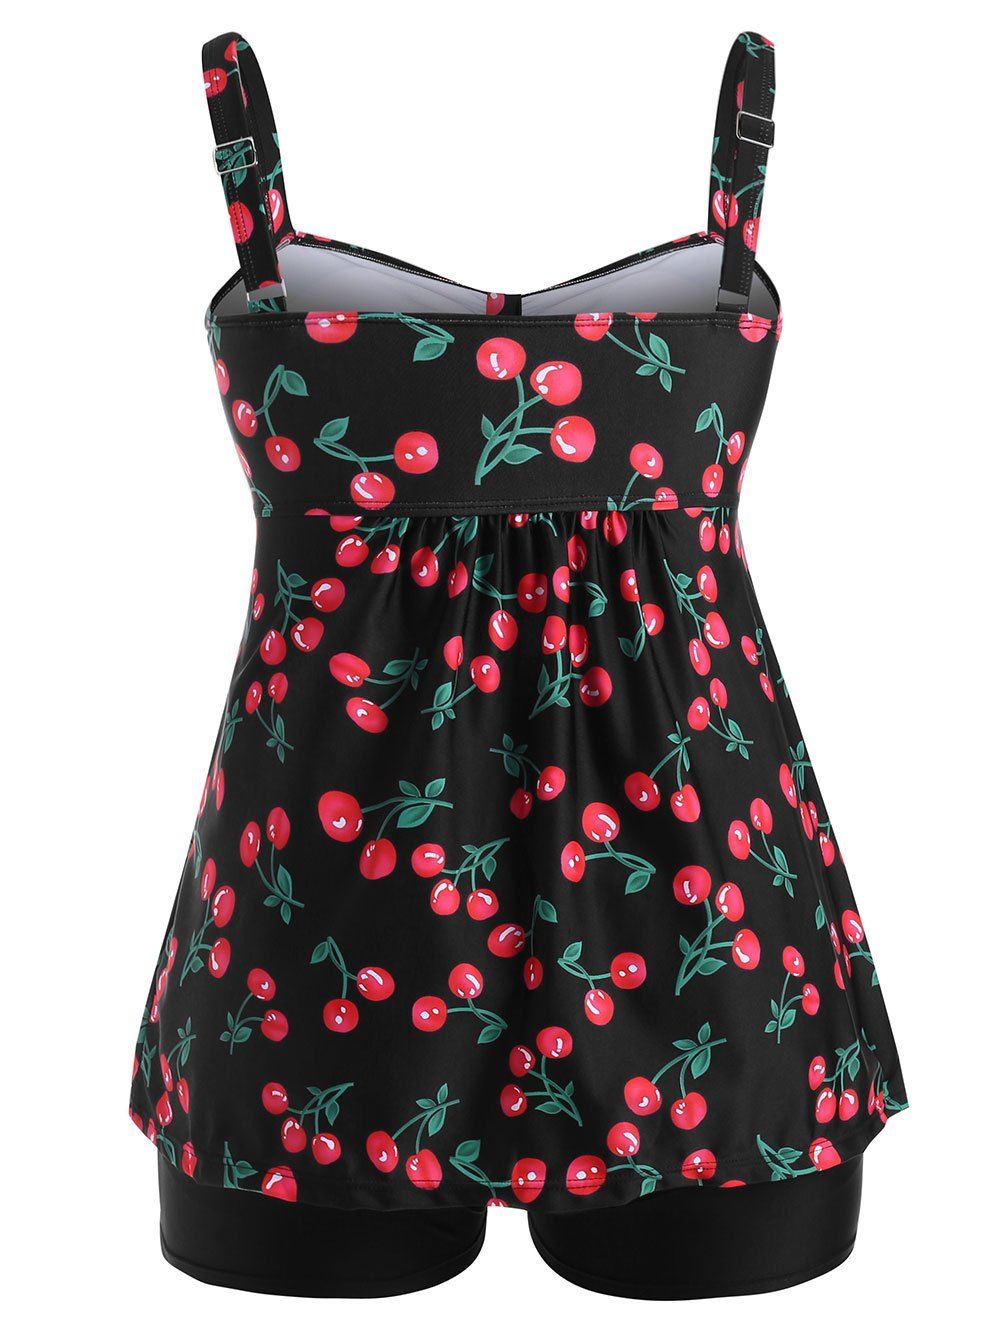 [29% OFF] 2020 Cherry Print Plus Size Skirted Tankini Swimsuit In BLACK ...